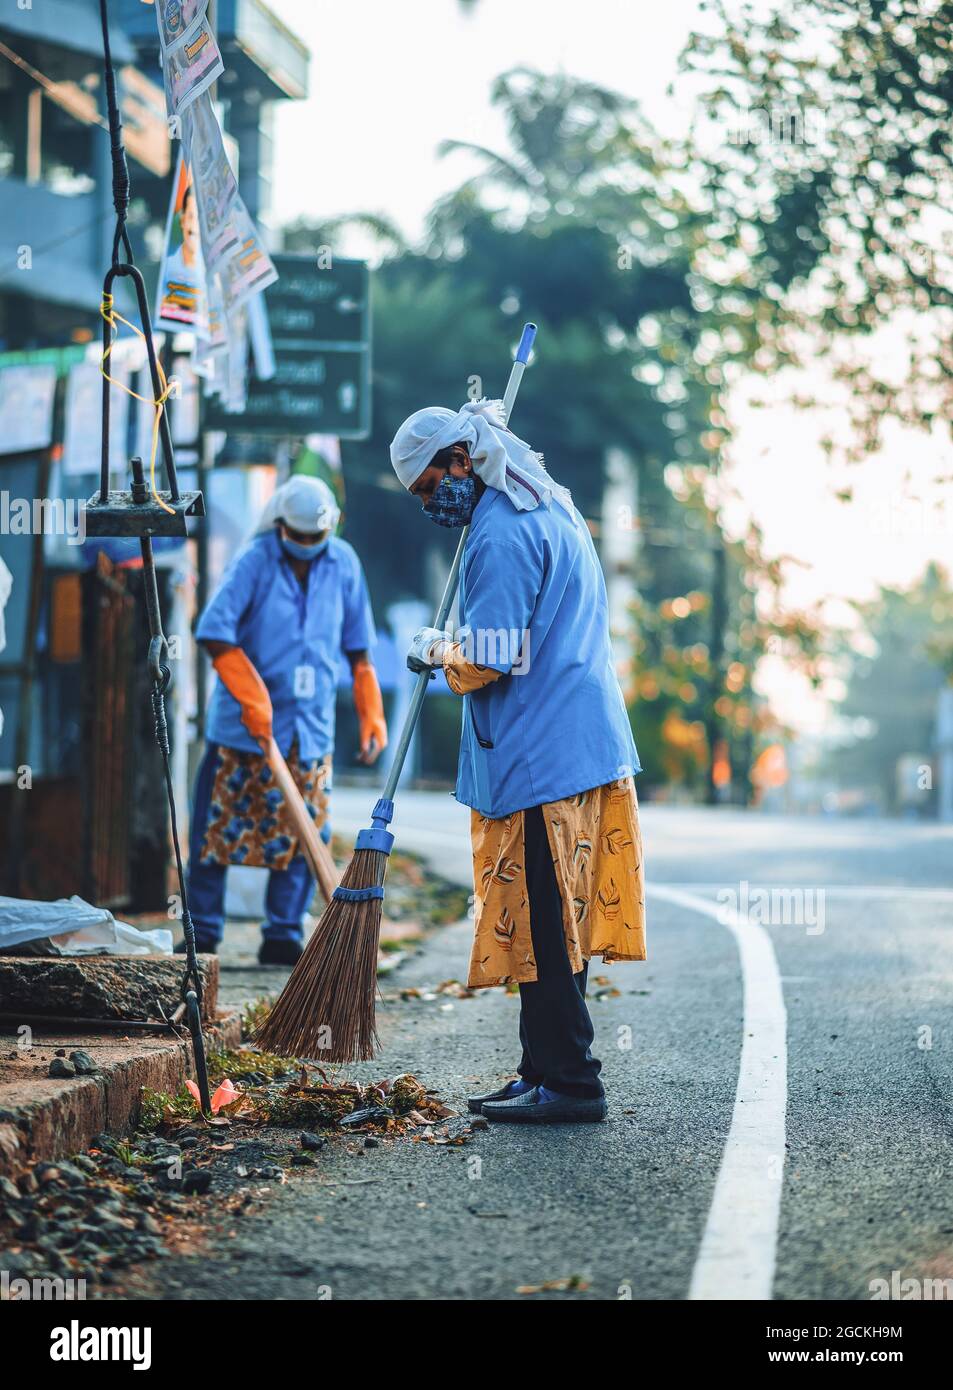 Indian Kerala Woman Working As A Road Sweeper Stock Photo